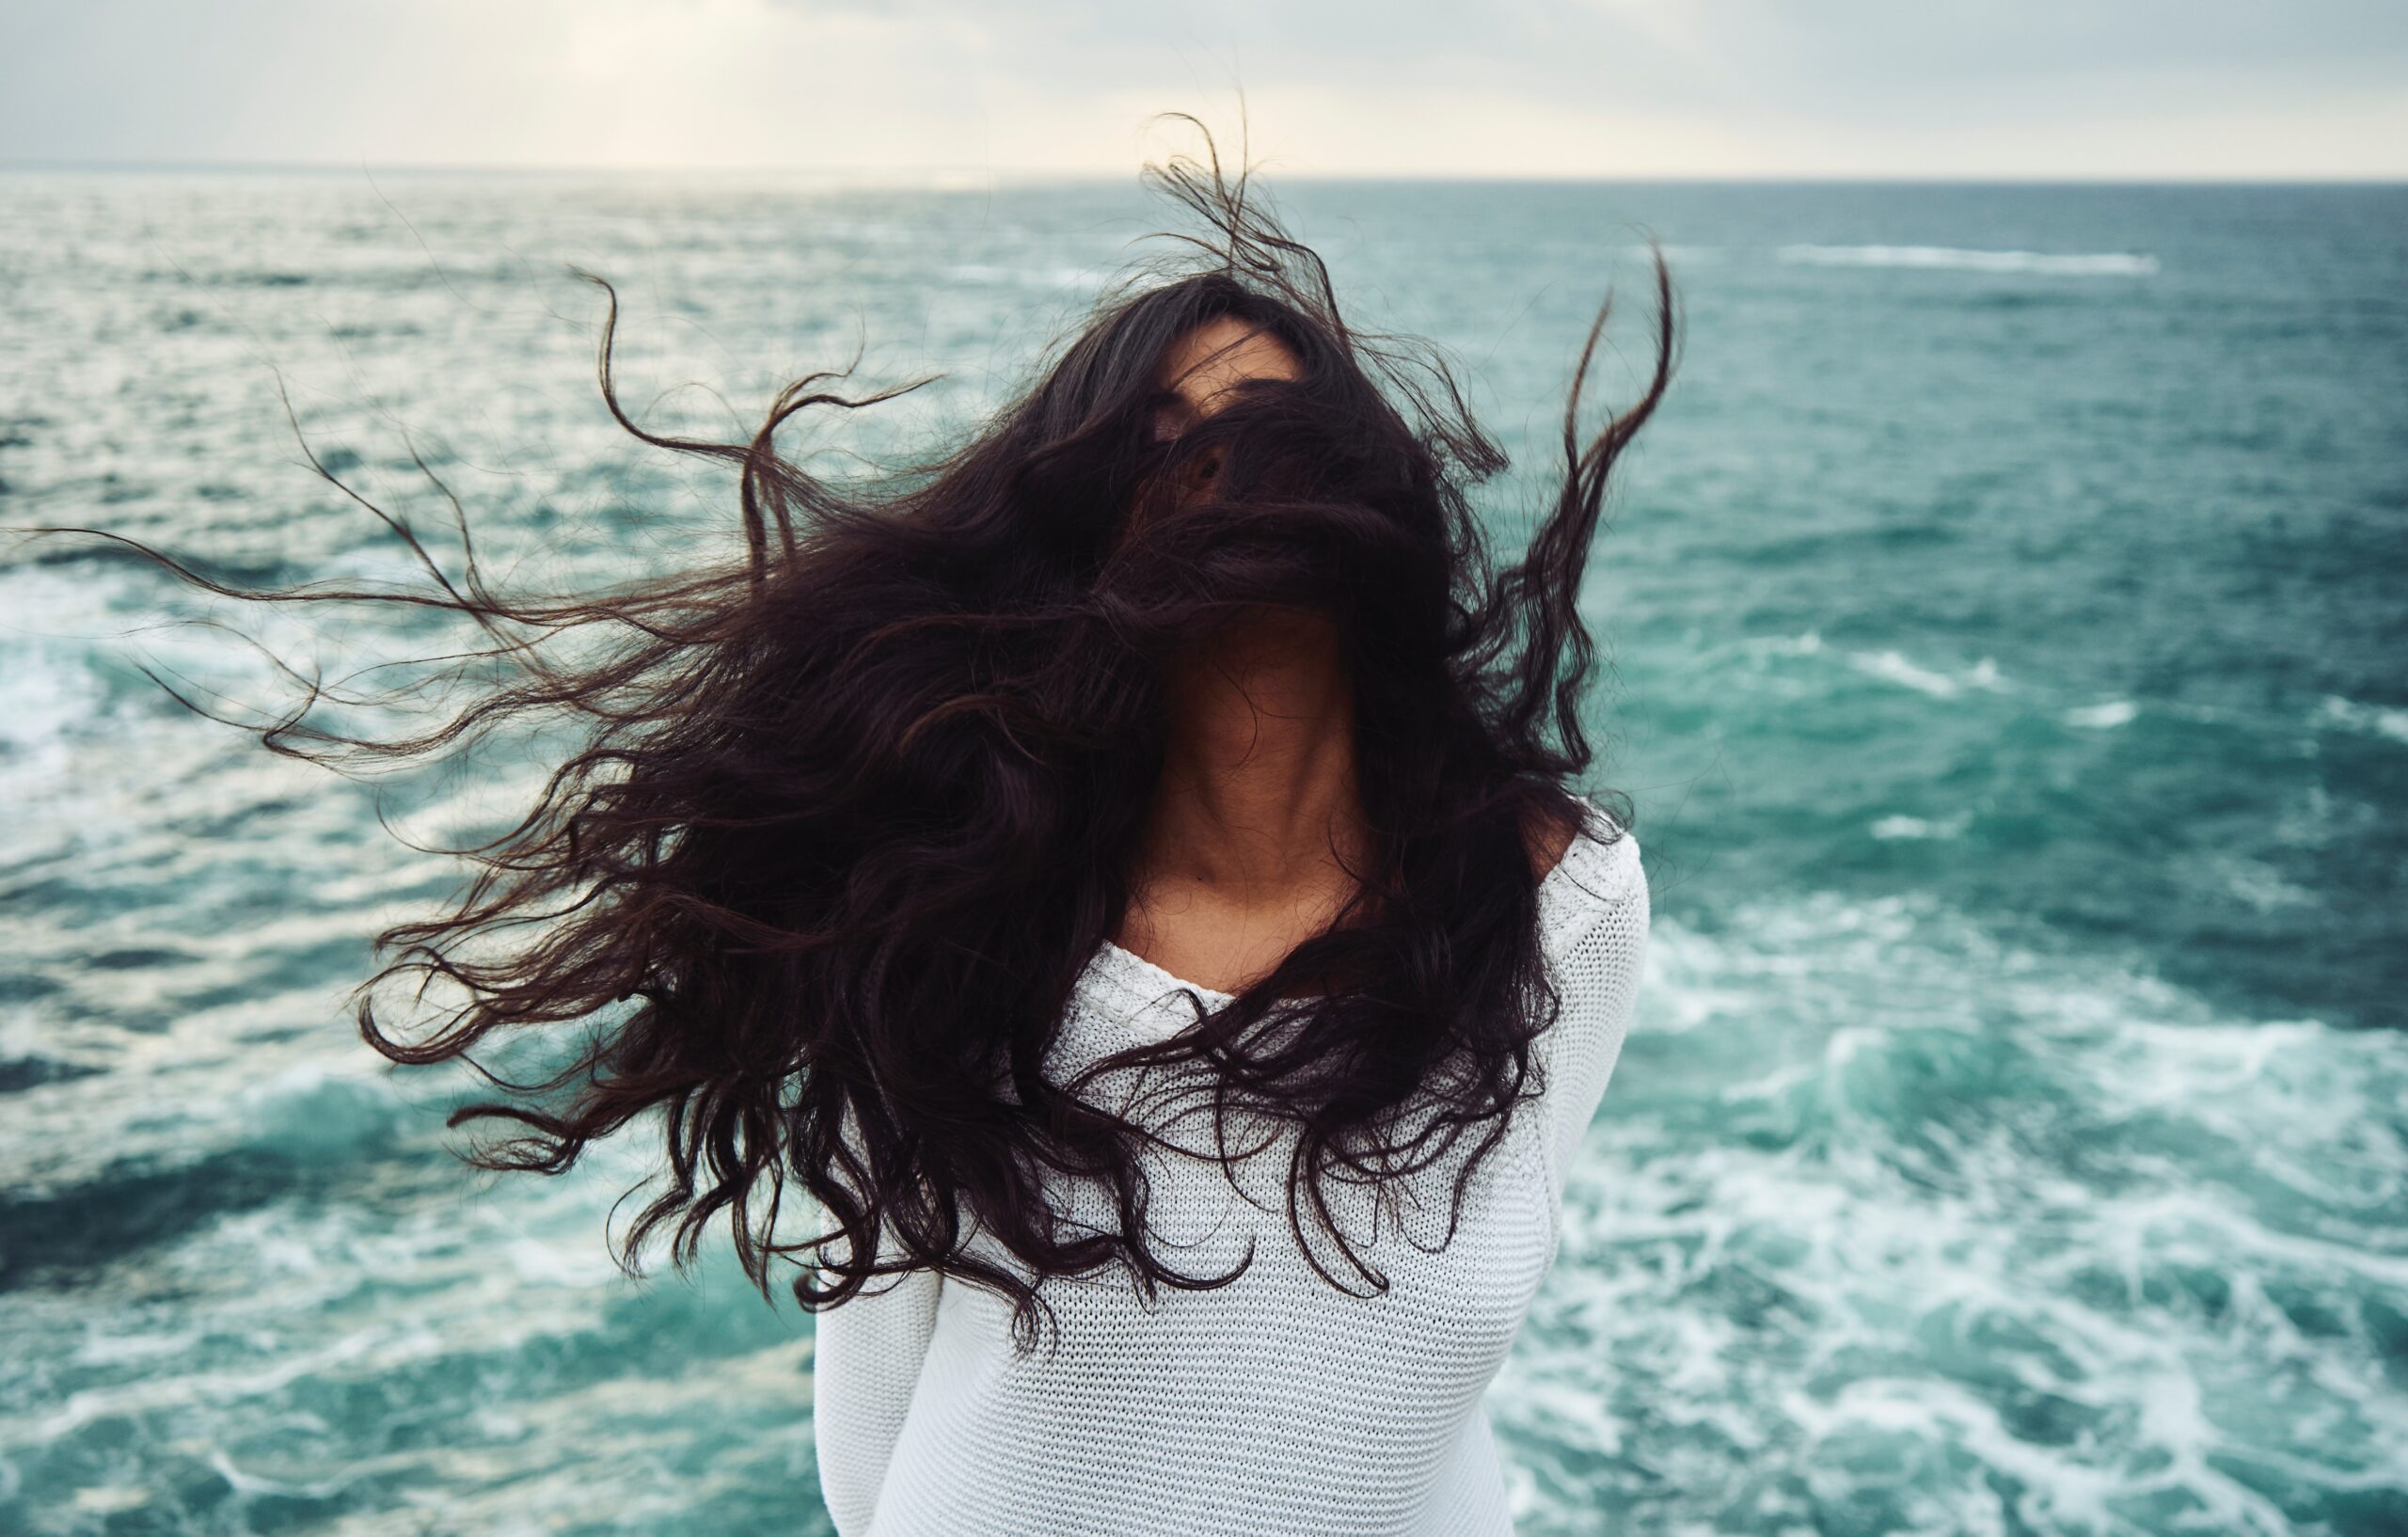 Woman standing near water with her hair being blown into her face